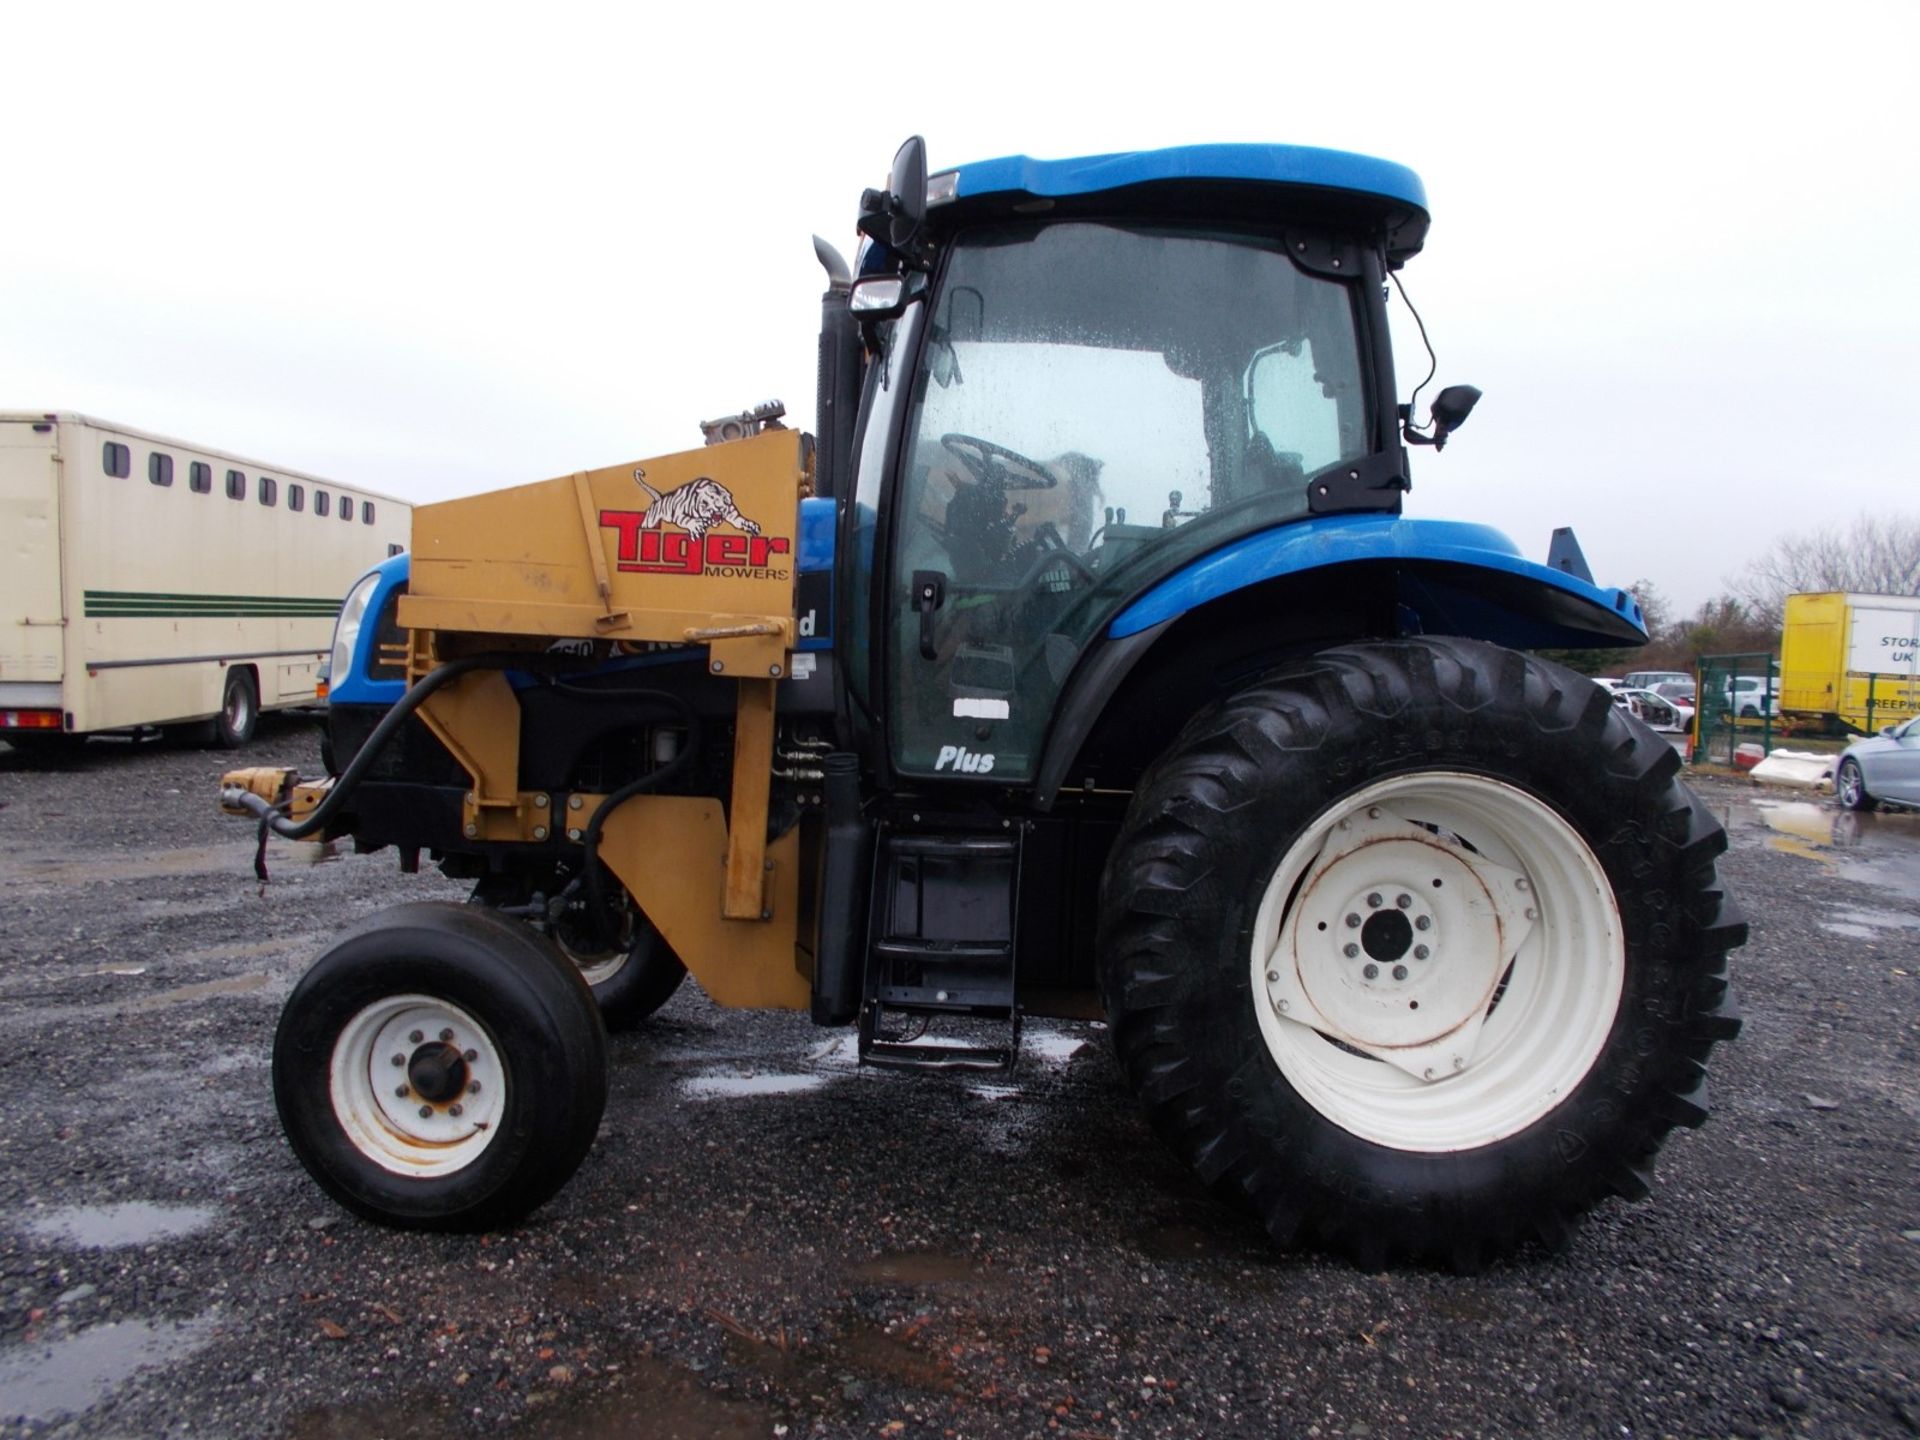 2003 NEW HOLLAND TS100A TRACTOR WITH MOWER ATTACHMENT, 4.5 LITRE 100HP TURBO DIESEL *PLUS VAT*